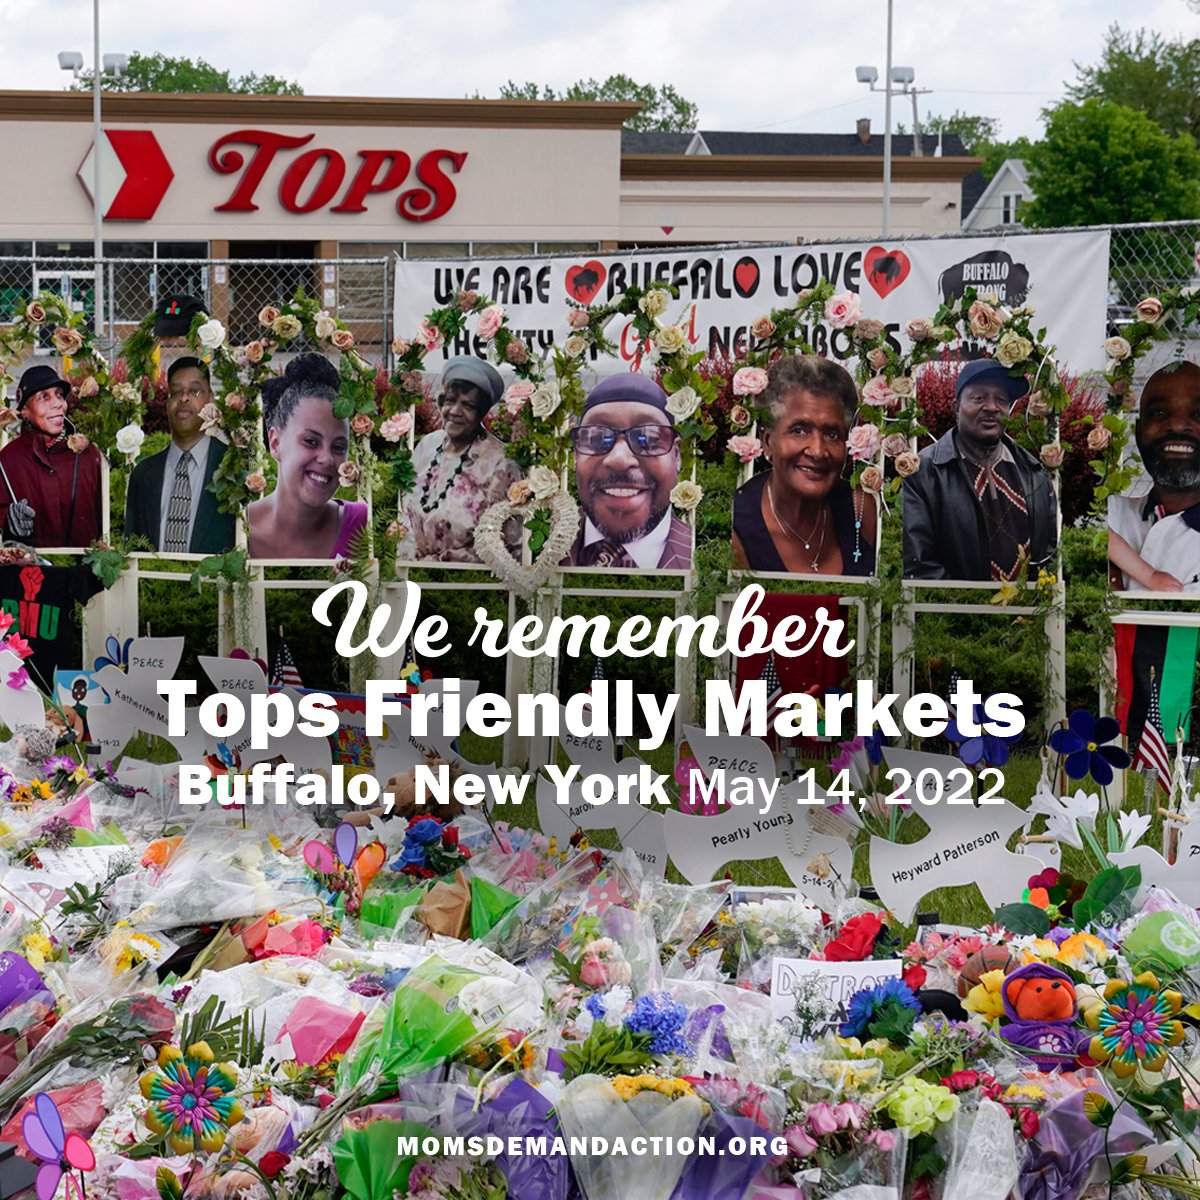 Two years ago today, a white supremacist armed with an AR-15-style rifle that was modified to accept high-capacity magazines carried out a hate-fueled act of mass gun violence at Tops Friendly Markets in Buffalo, New York targeting the Black community. Ten people were killed and…